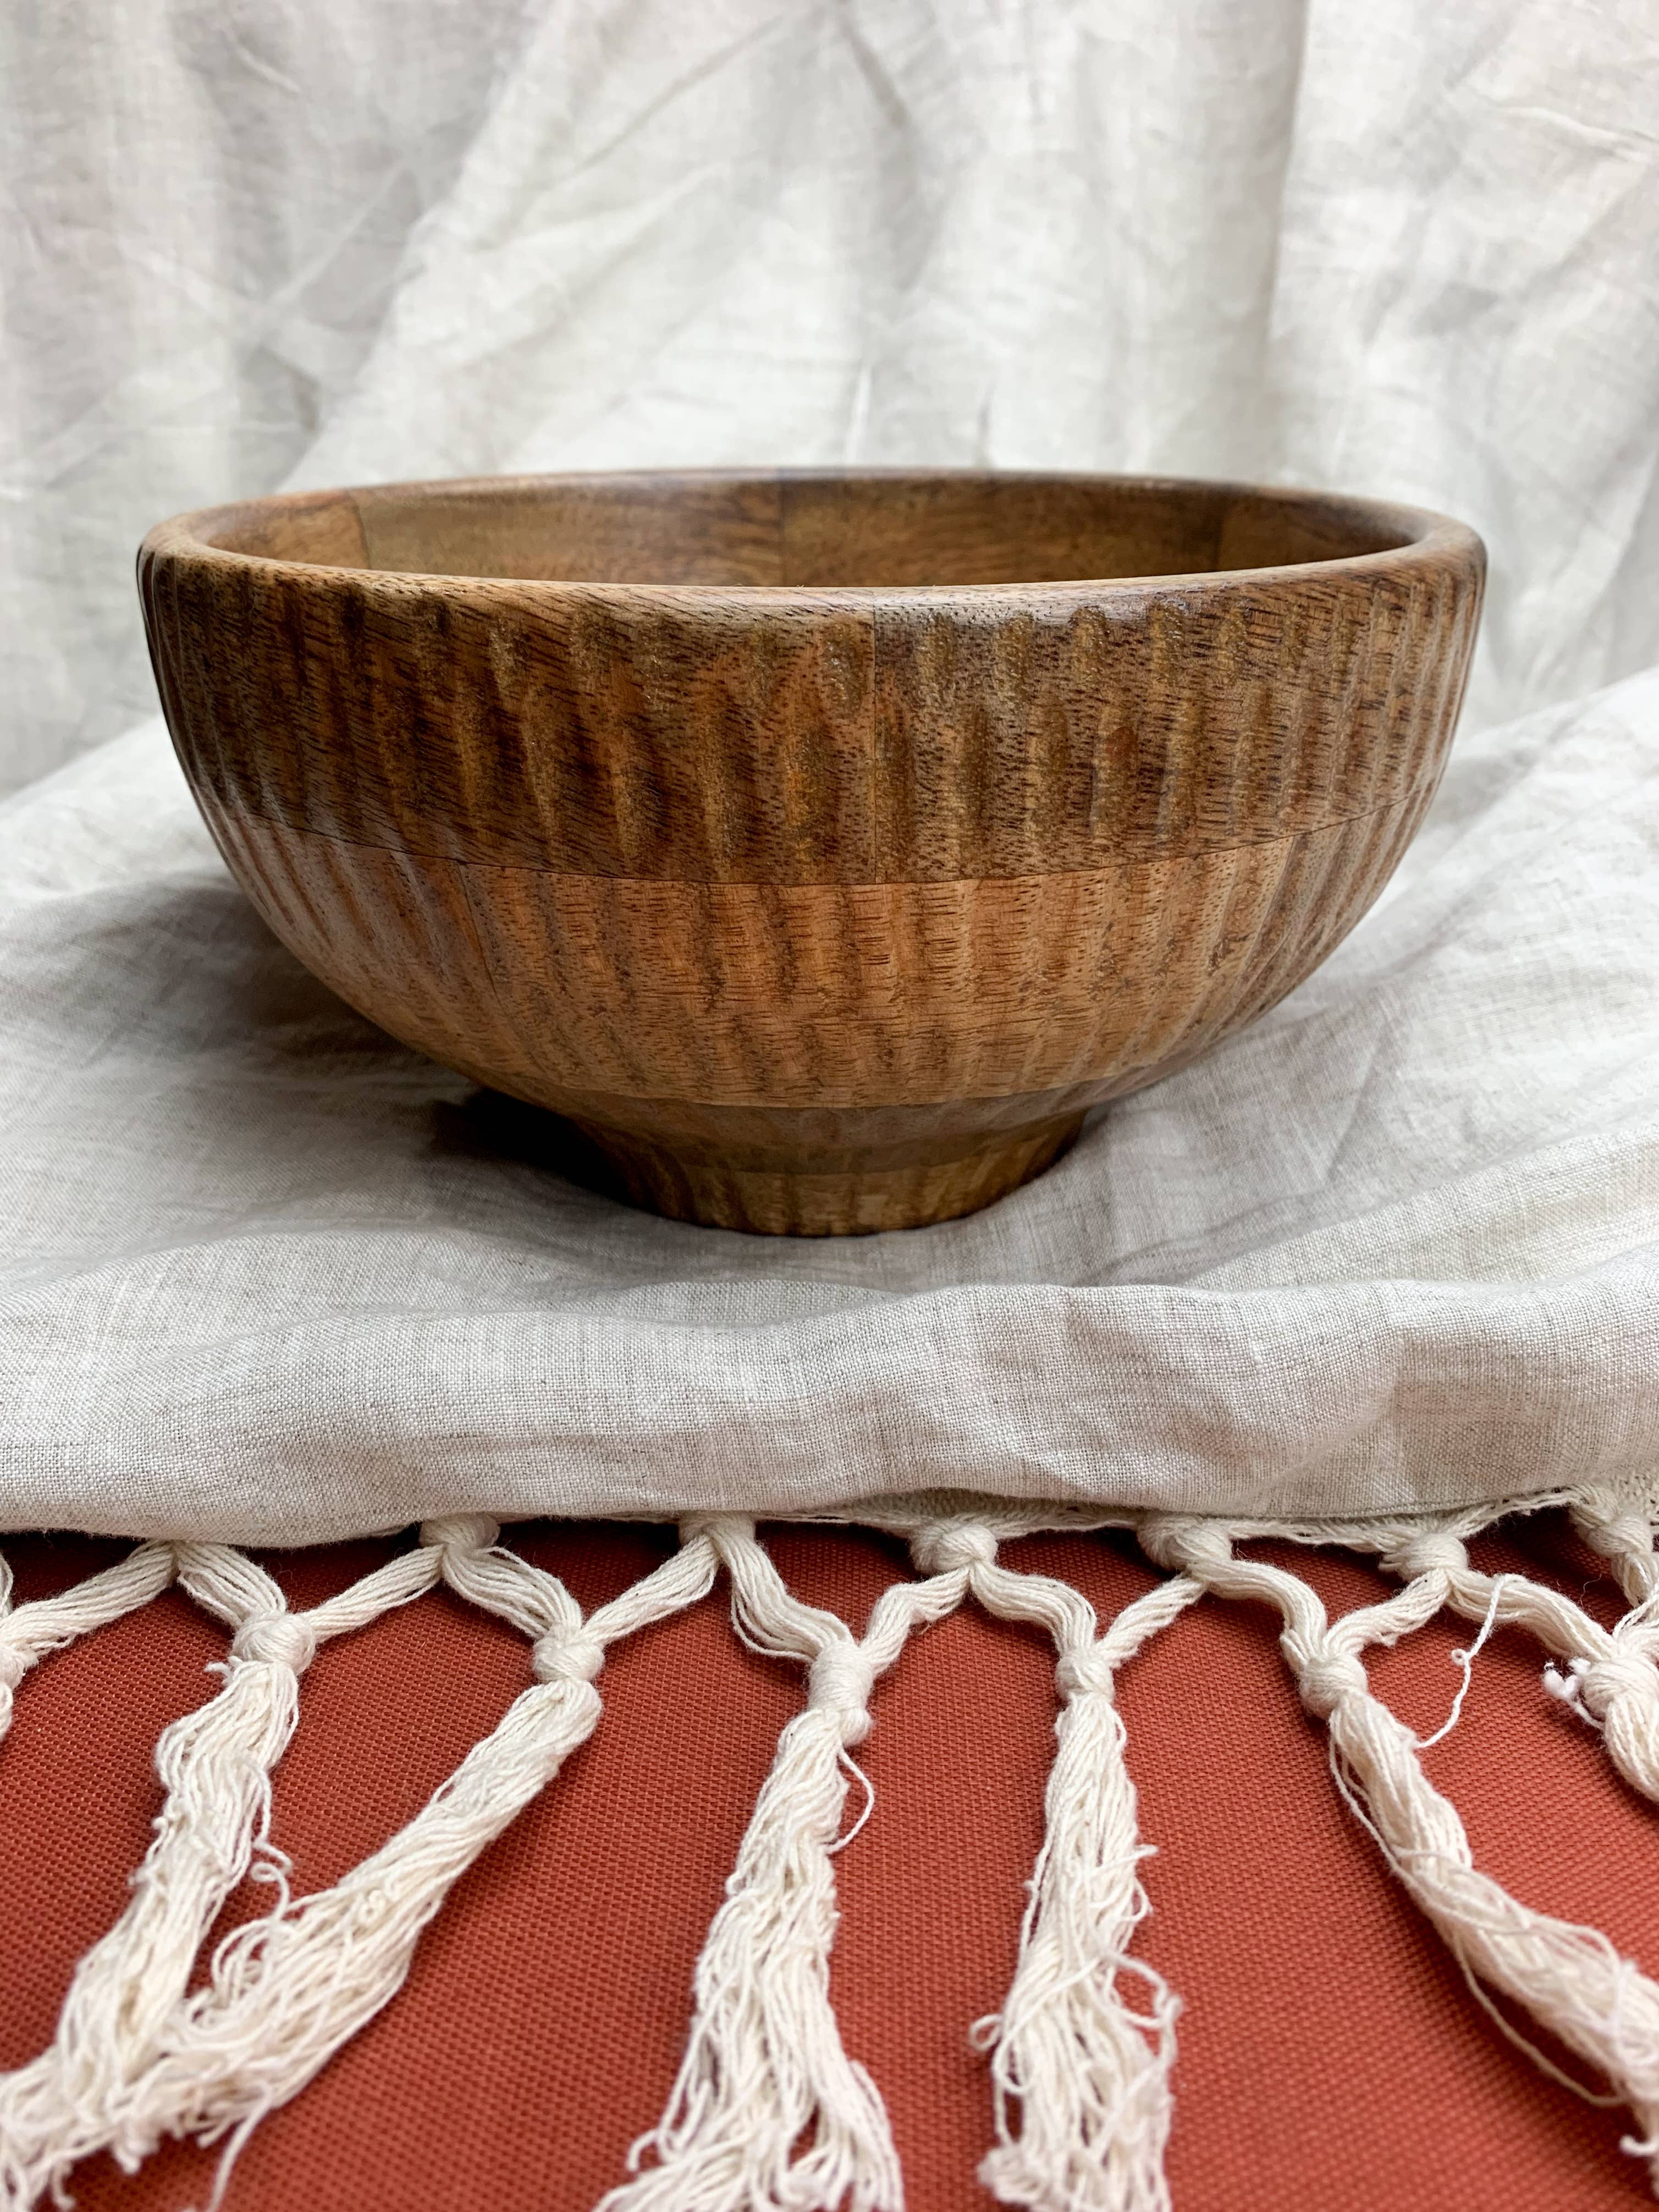 Textured Wood Footed Bowl Natural - Home Decor -Limited Supply